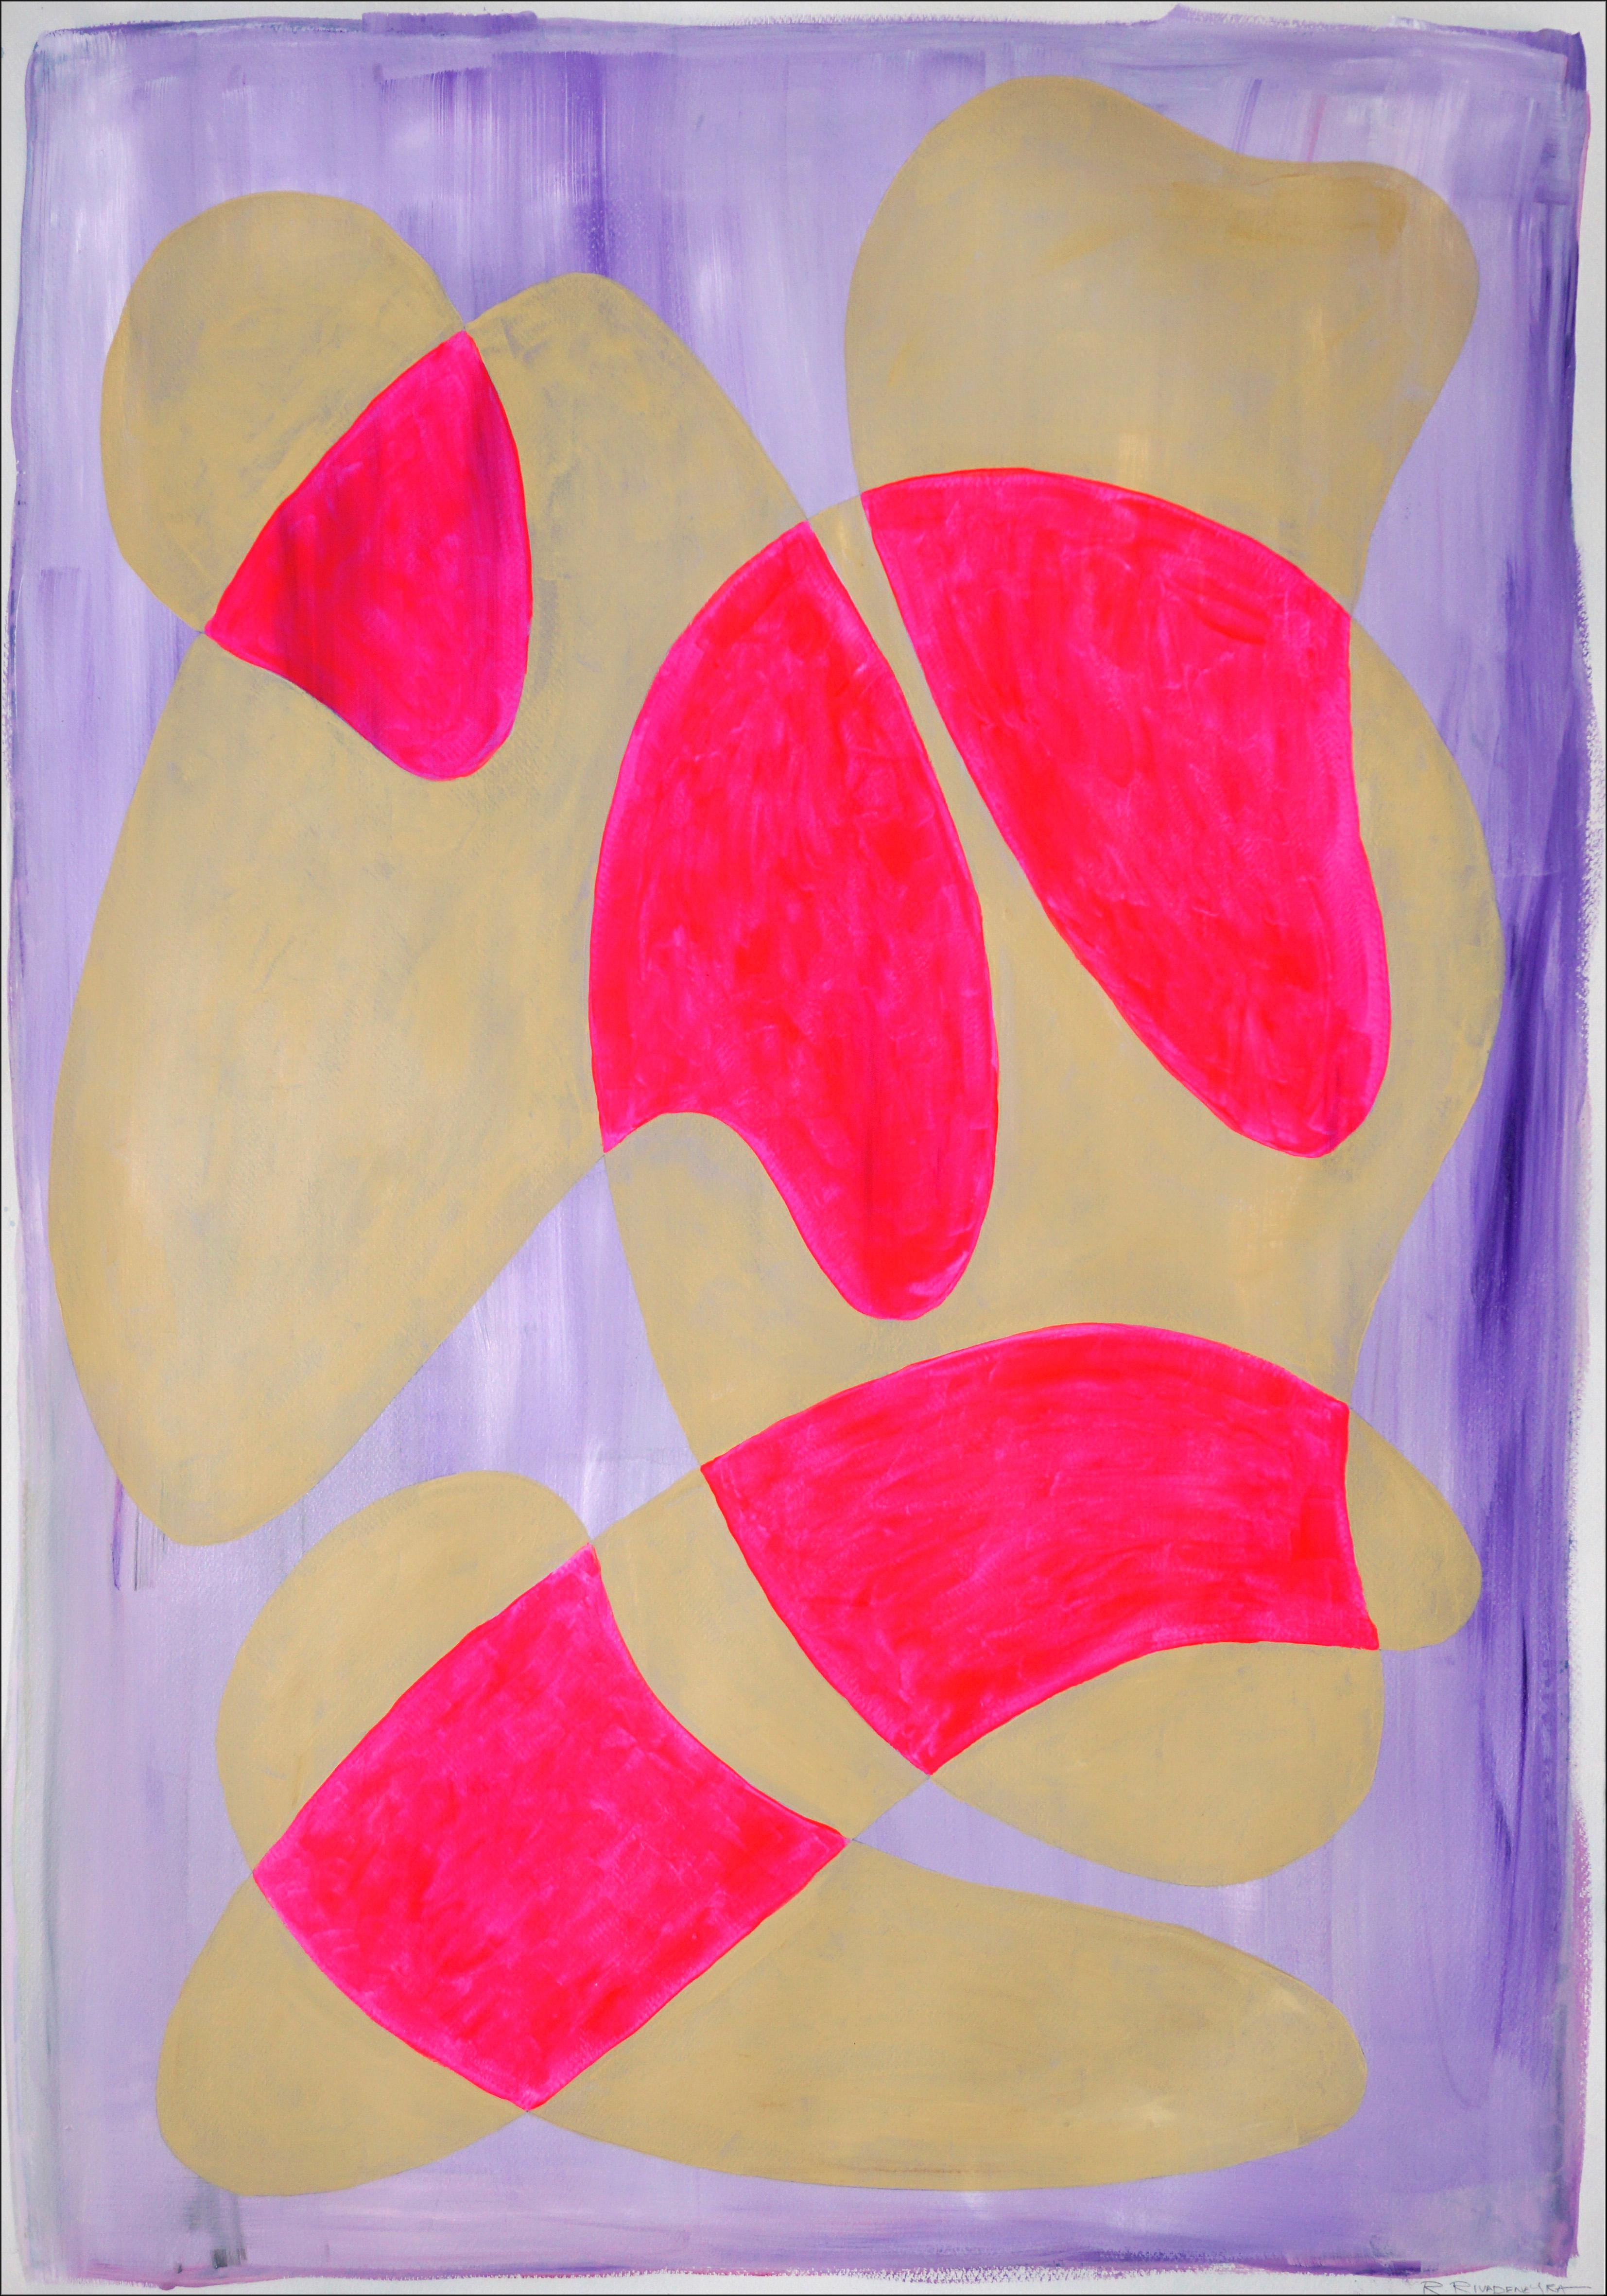 Ryan Rivadeneyra Abstract Painting - Hot Pink and Cream Curves, Avant Garde Shapes with Soft Urban Style Background 